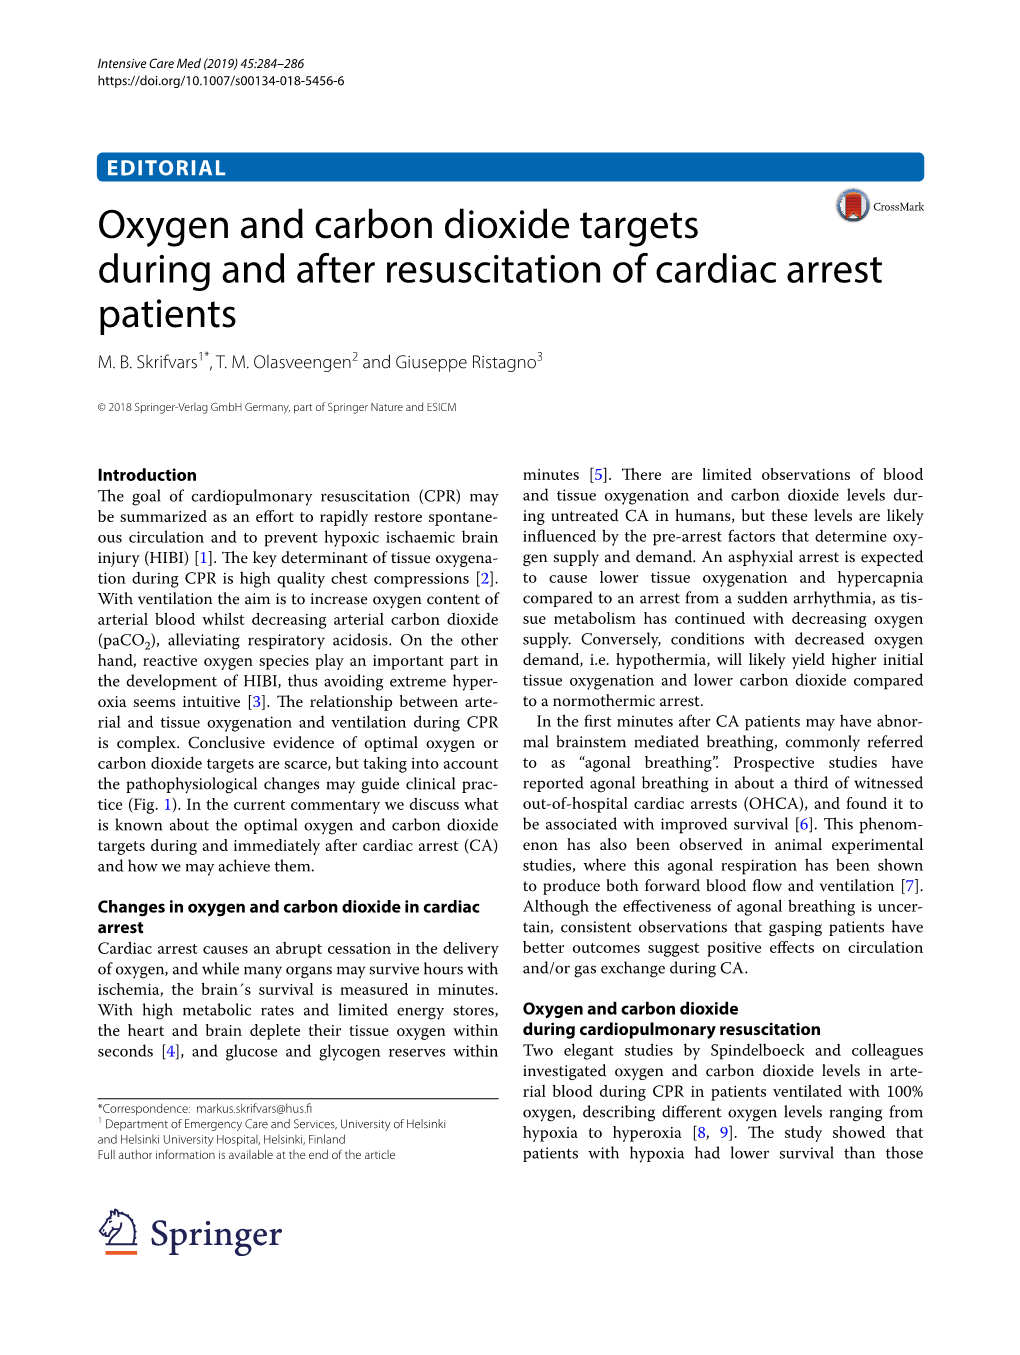 Oxygen and Carbon Dioxide Targets During and After Resuscitation of Cardiac Arrest Patients M